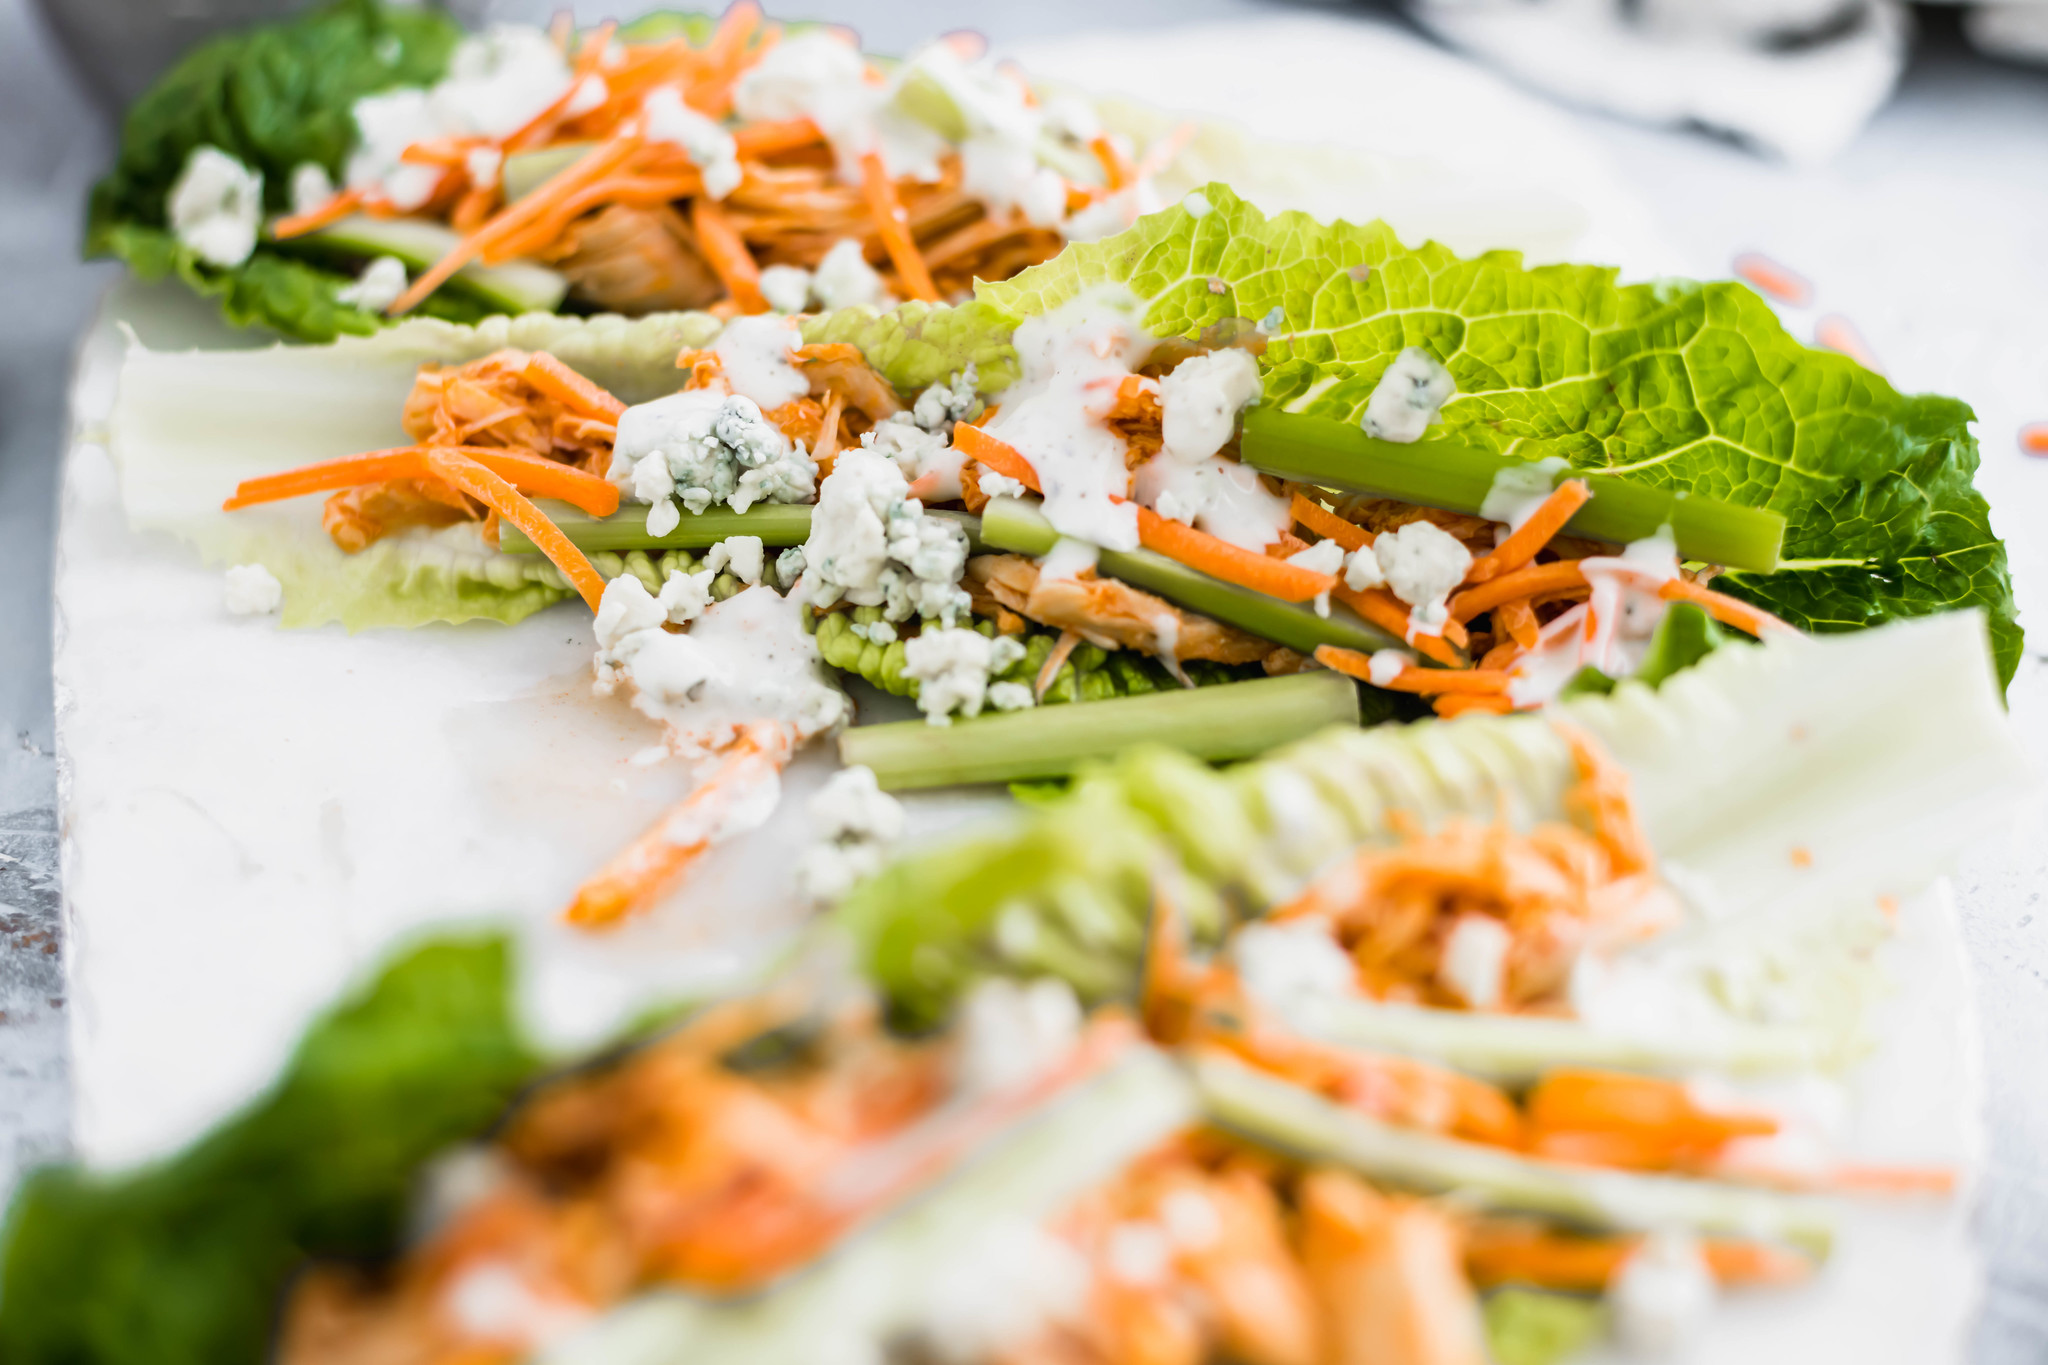 Buffalo Chicken Lettuce Wraps make for an easy, healthy and delicious meal. The buffalo chicken cooks in the slow cooker to make this super simple.